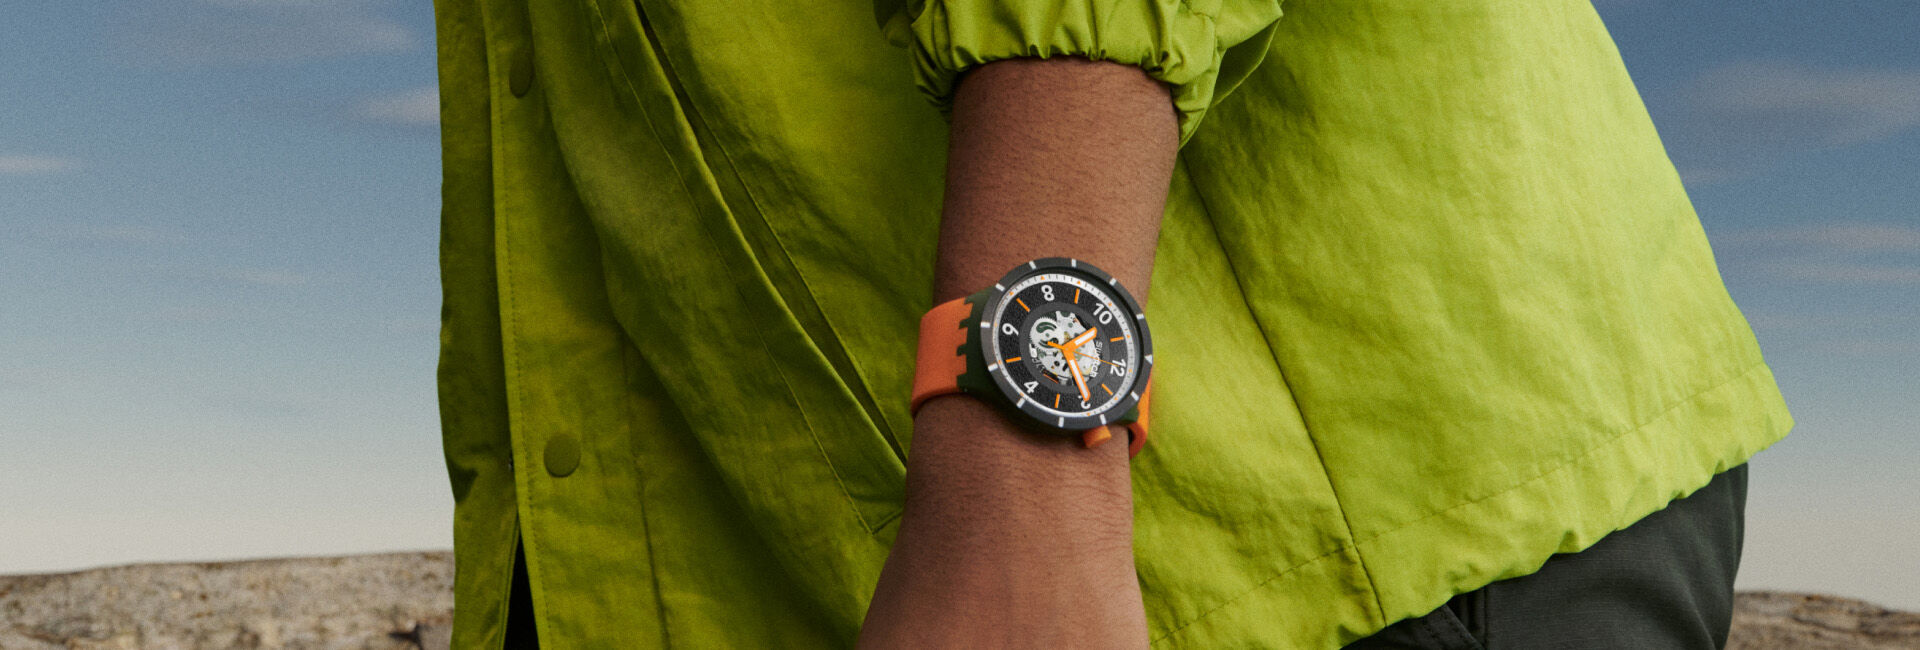 Is Bigger Better? Our Favorite Oversized Watches - Bob's Watches